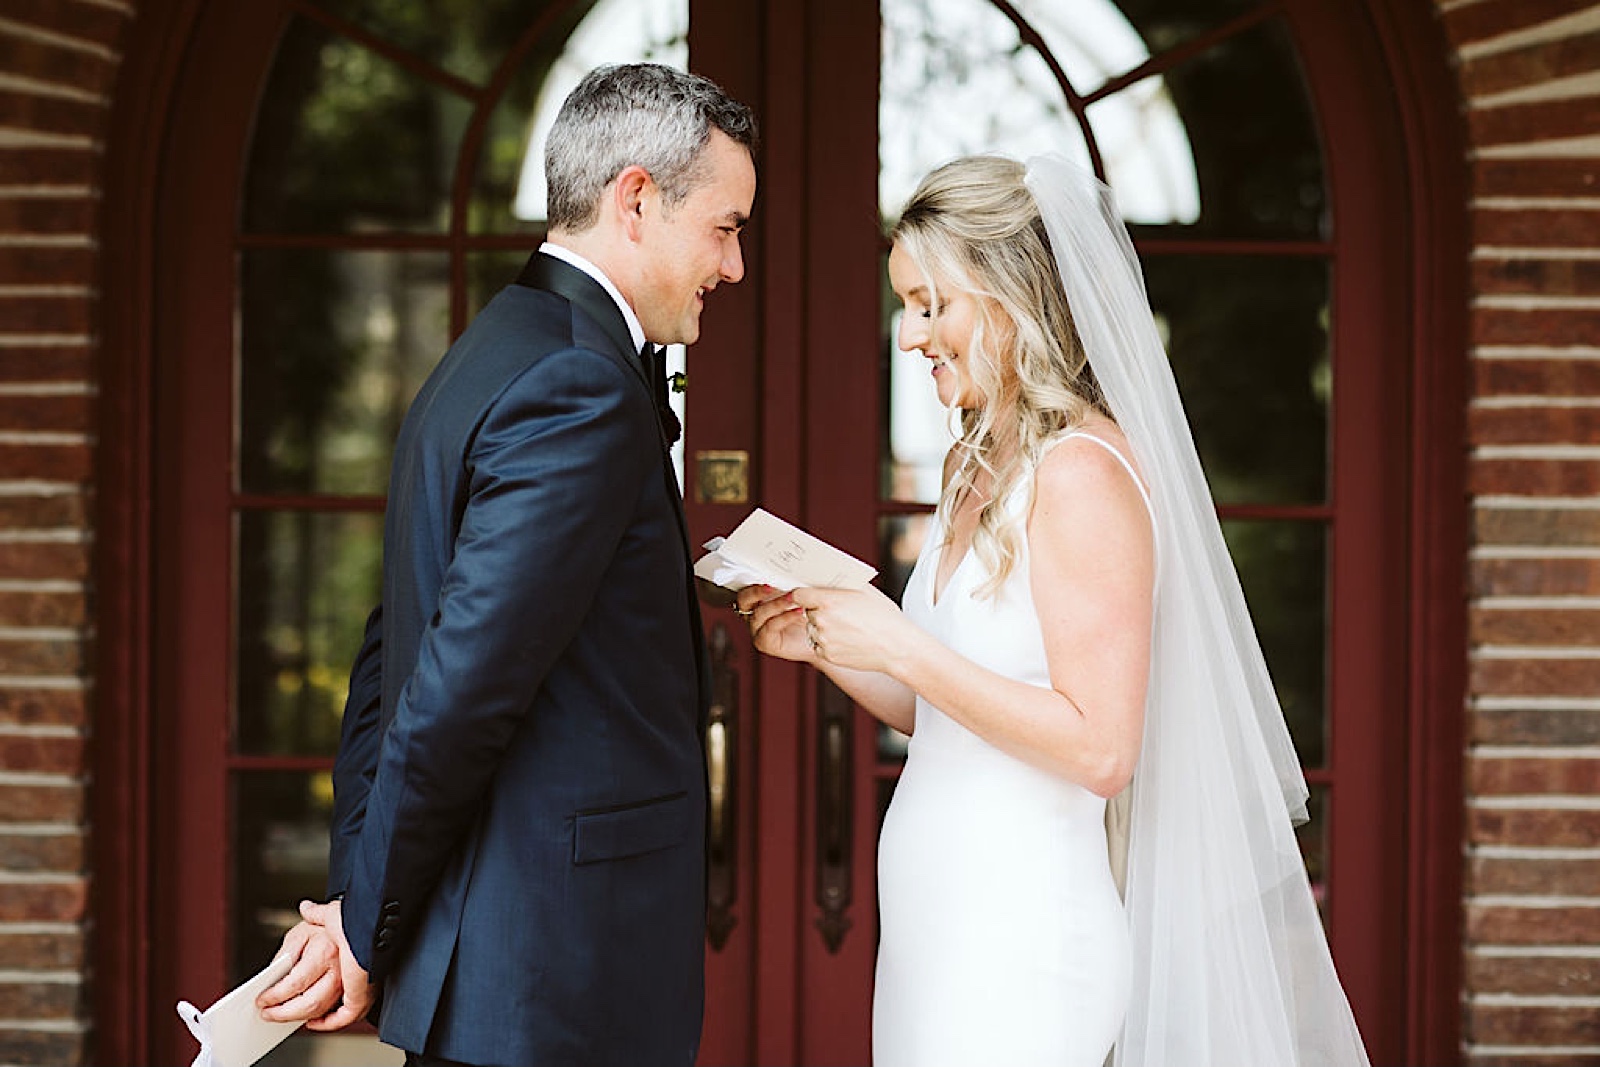 Vibrant Wedding At Siren Song Vineyard: bride and groom exchange private vows